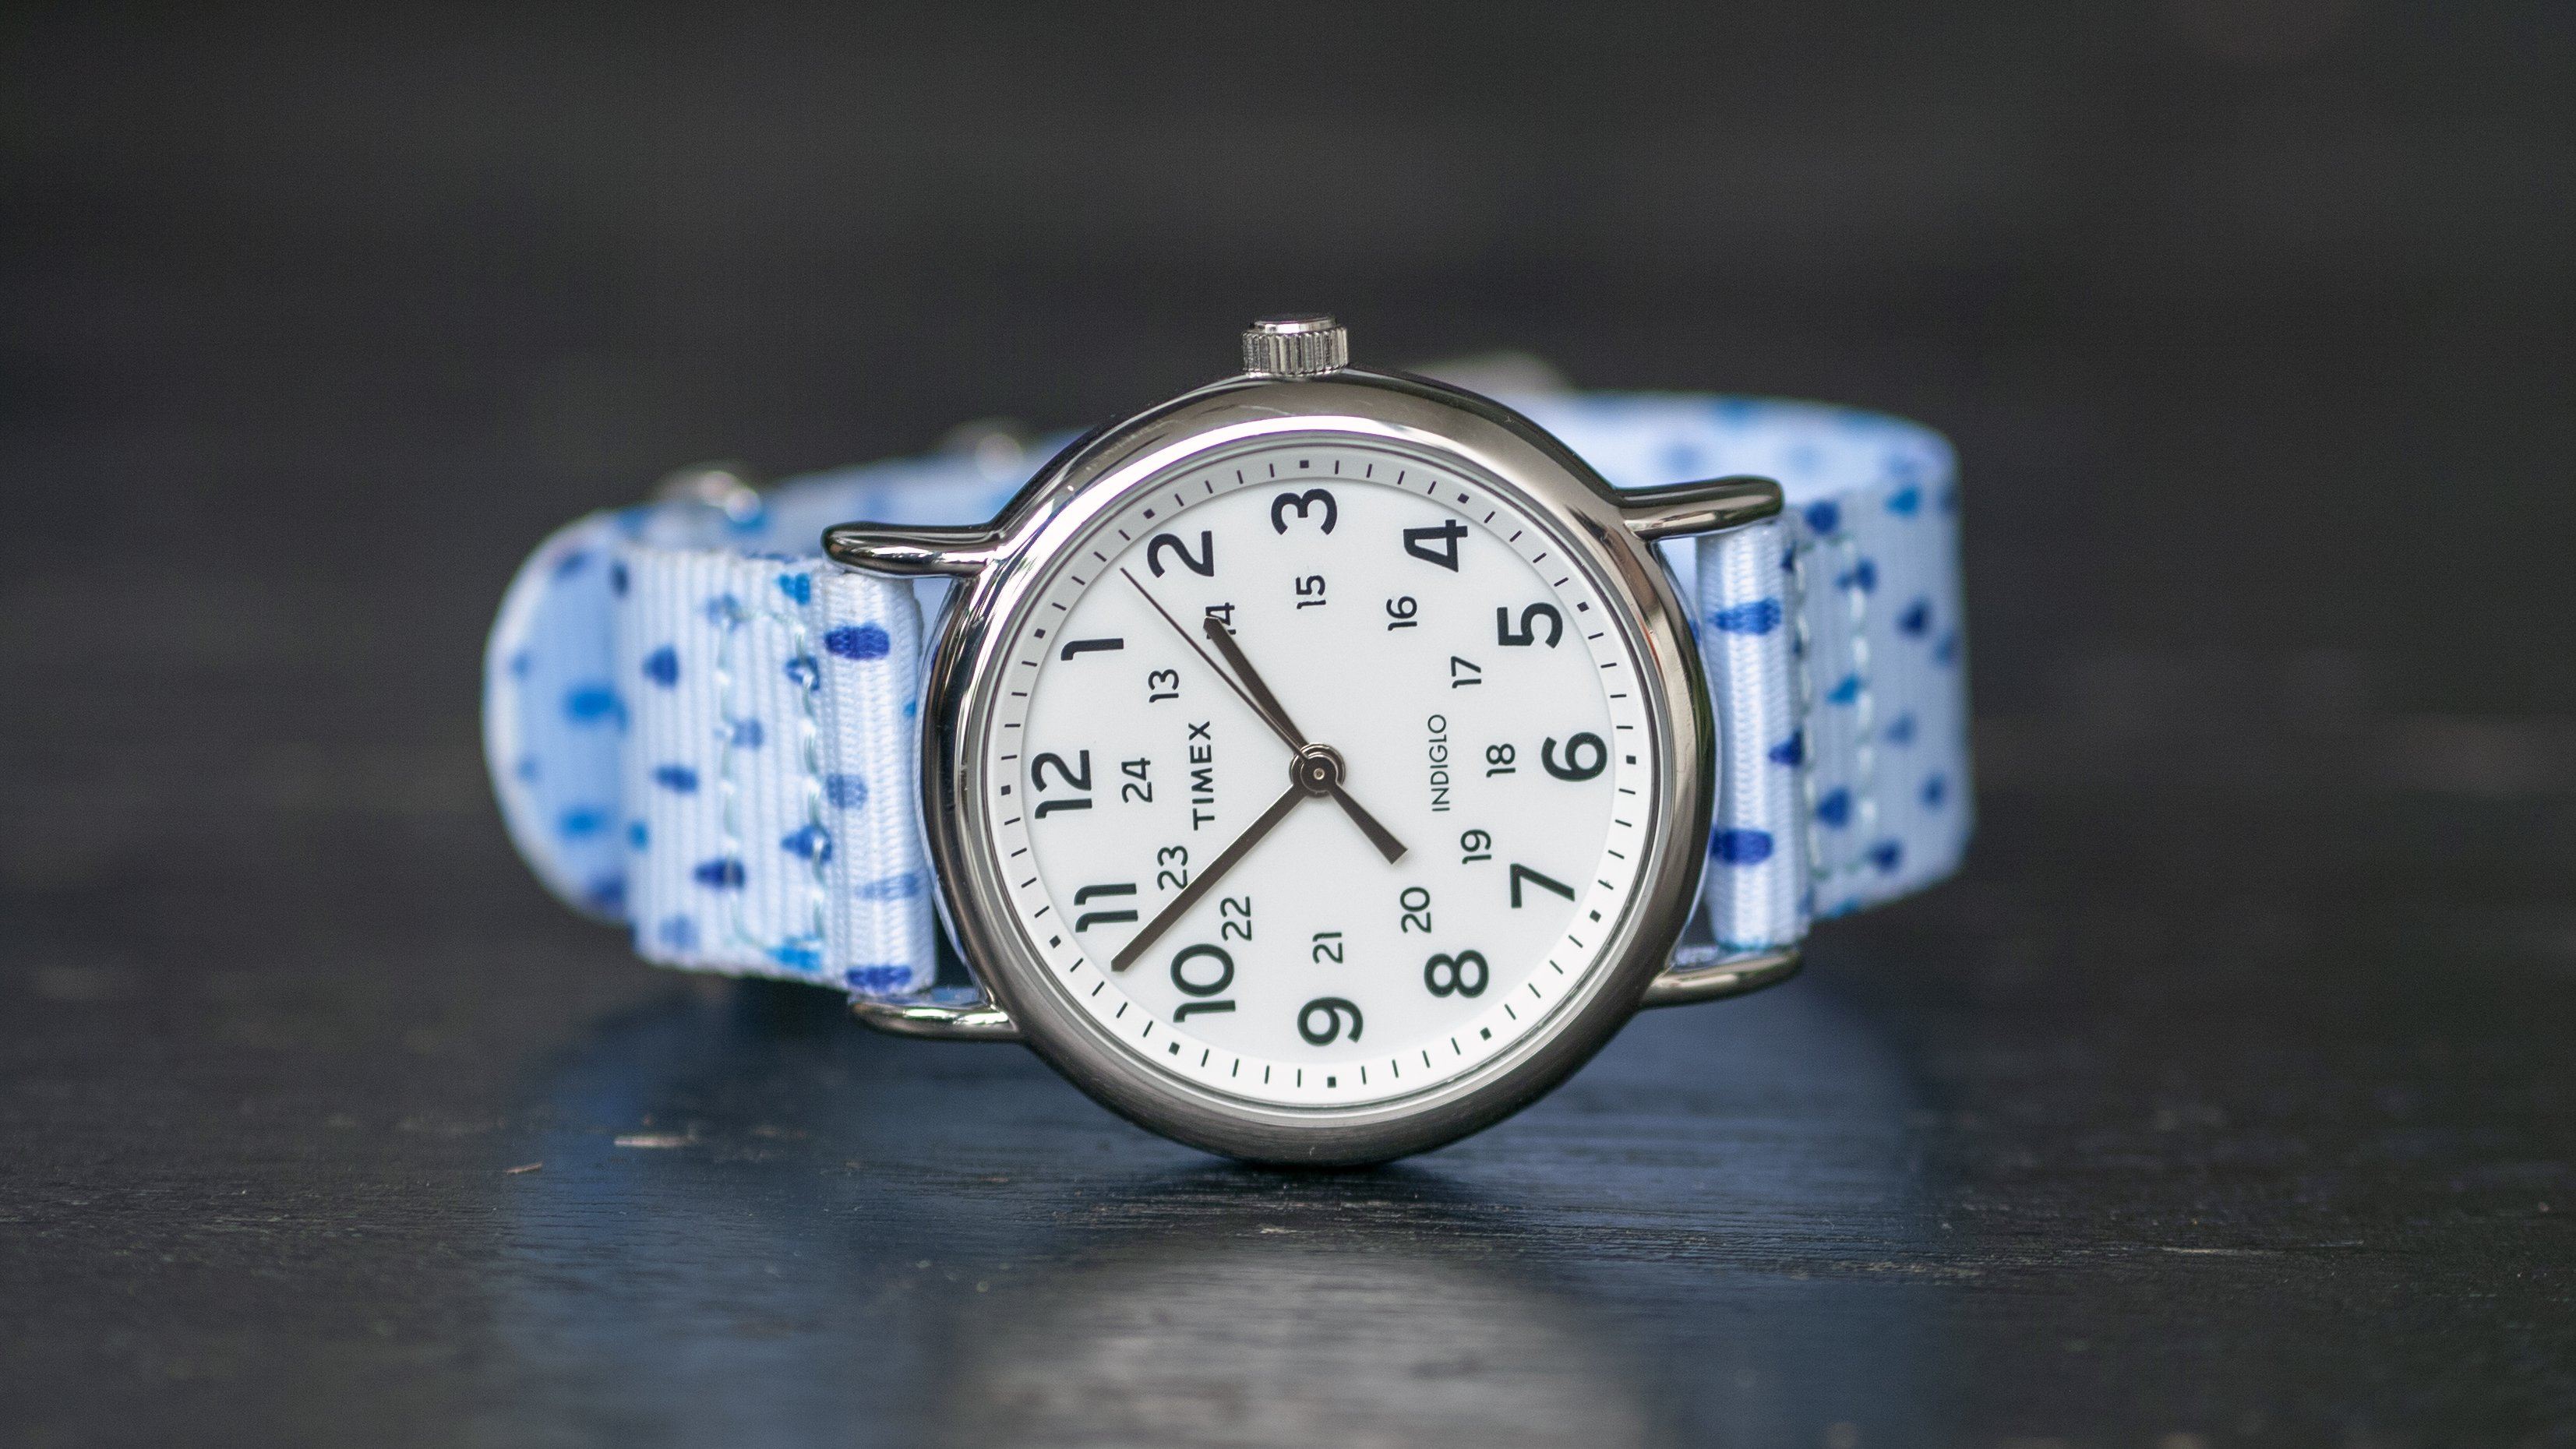 timex watch with raindrops strap band